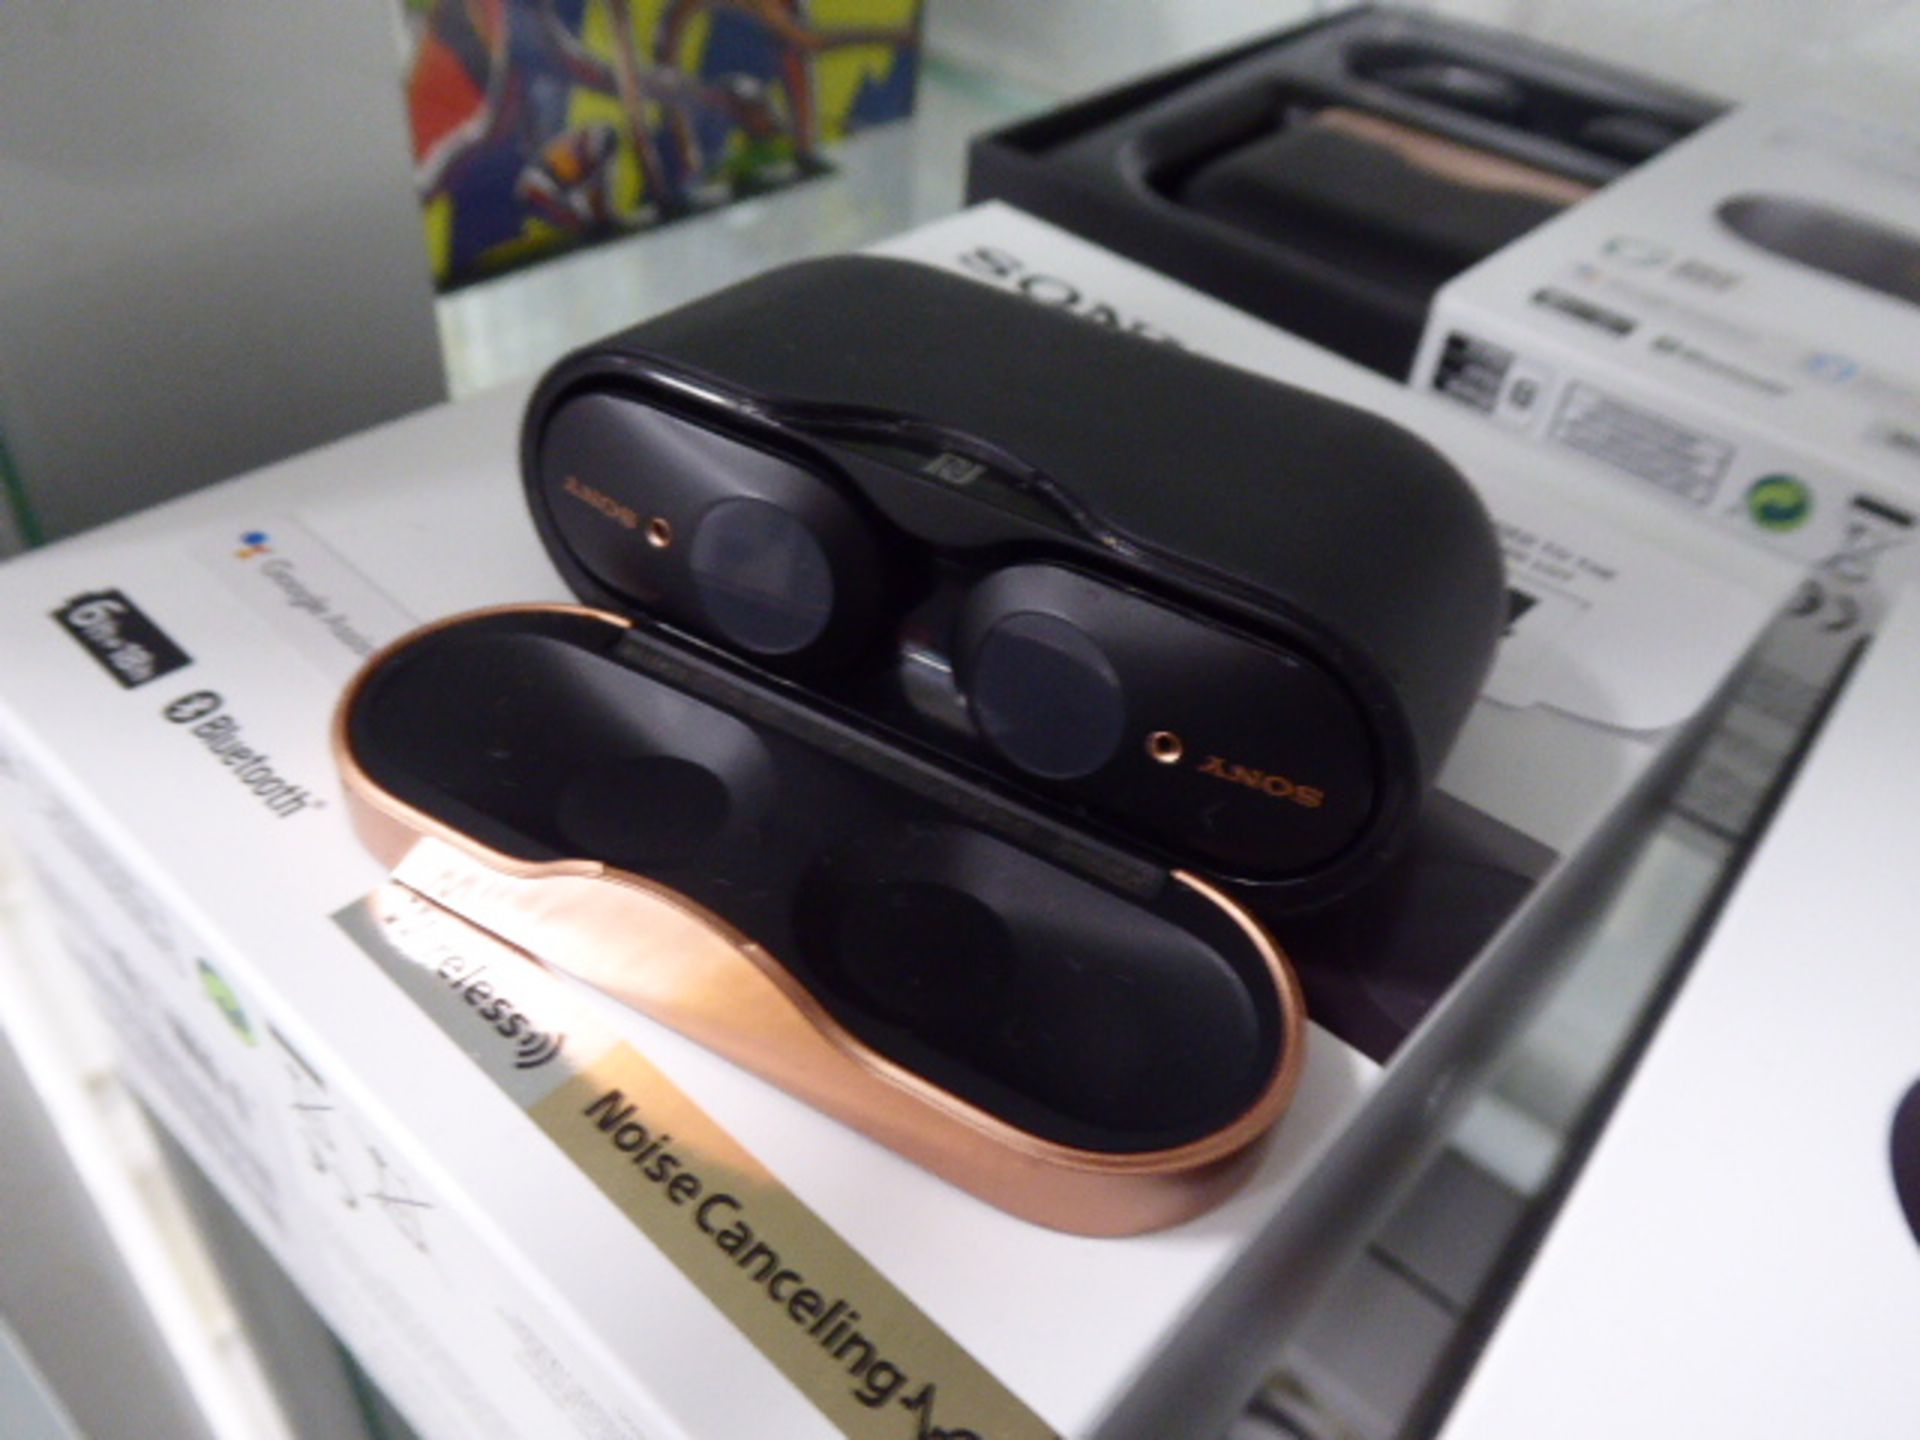 Sony WF-1000XM3 wireless noise cancelling ear buds with charging case and spare ear tips and box